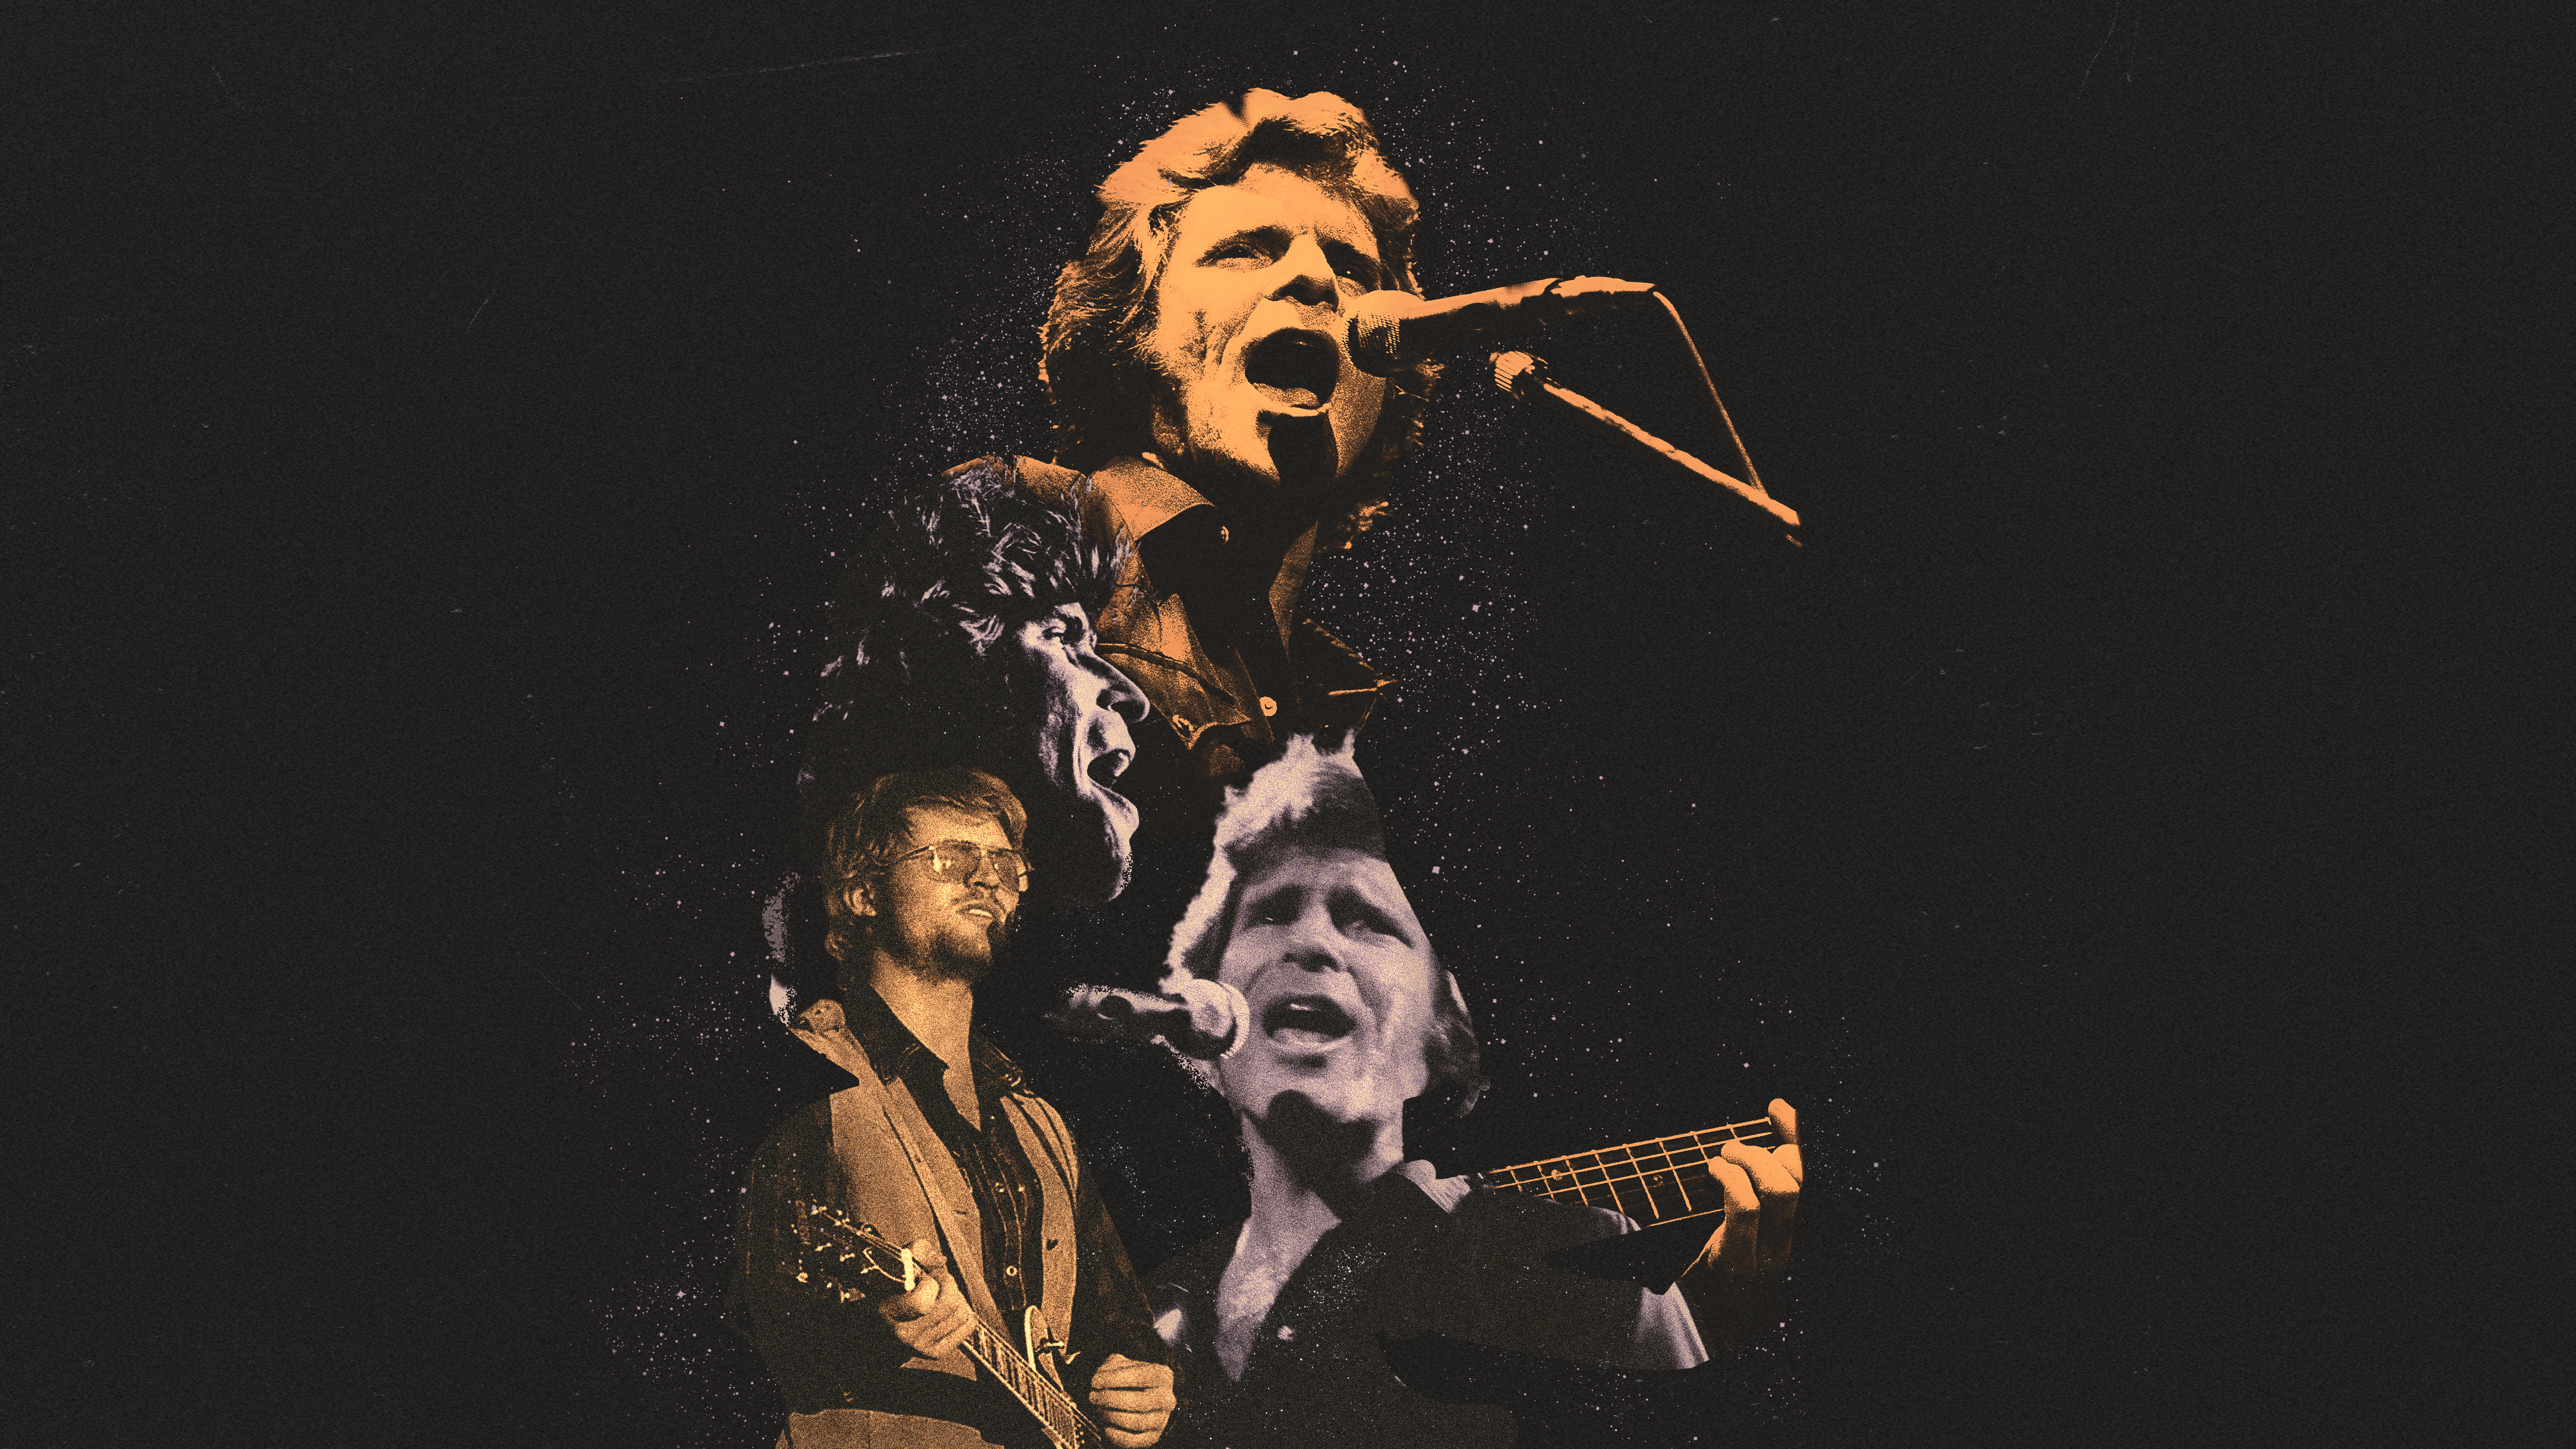 A collage of photos of John Fogerty, and the author of this piece performing as John Fogerty